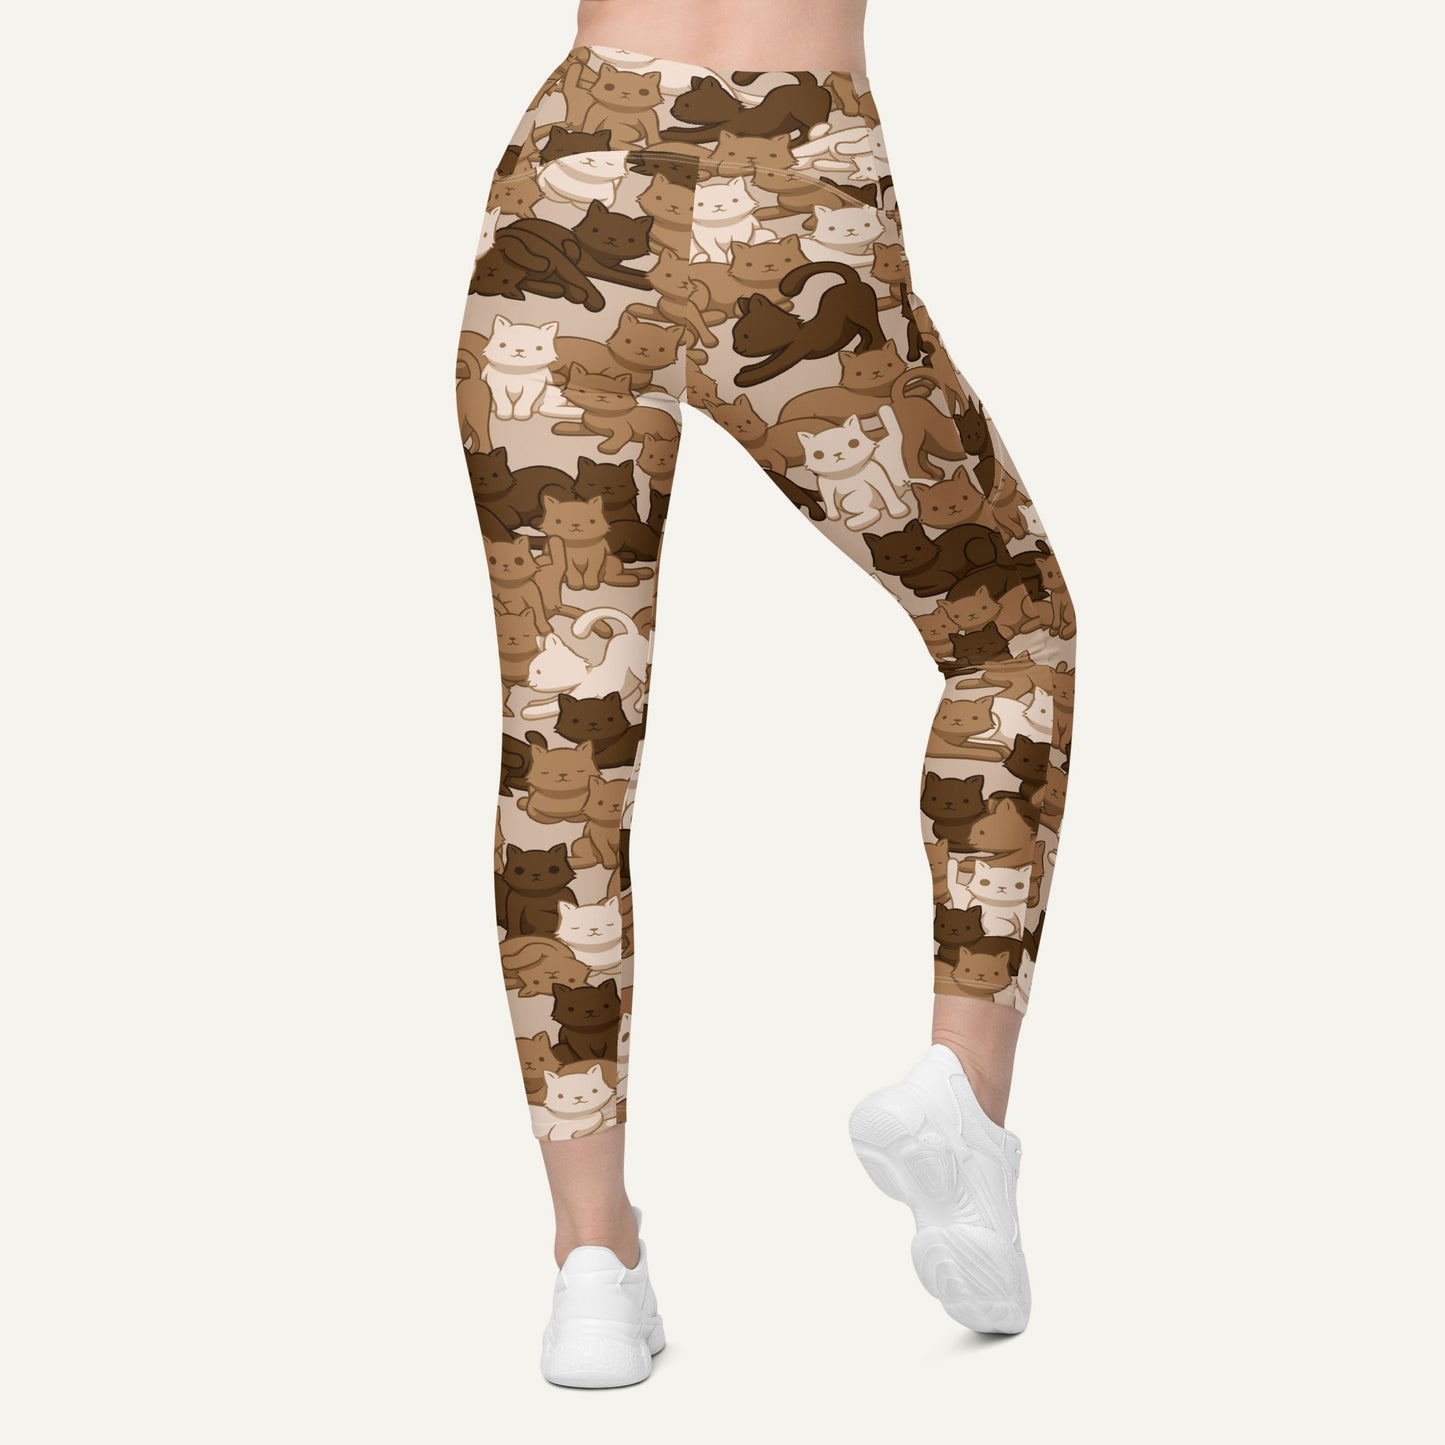 Cats Camouflage Desert High-Waisted Crossover Leggings With Pockets